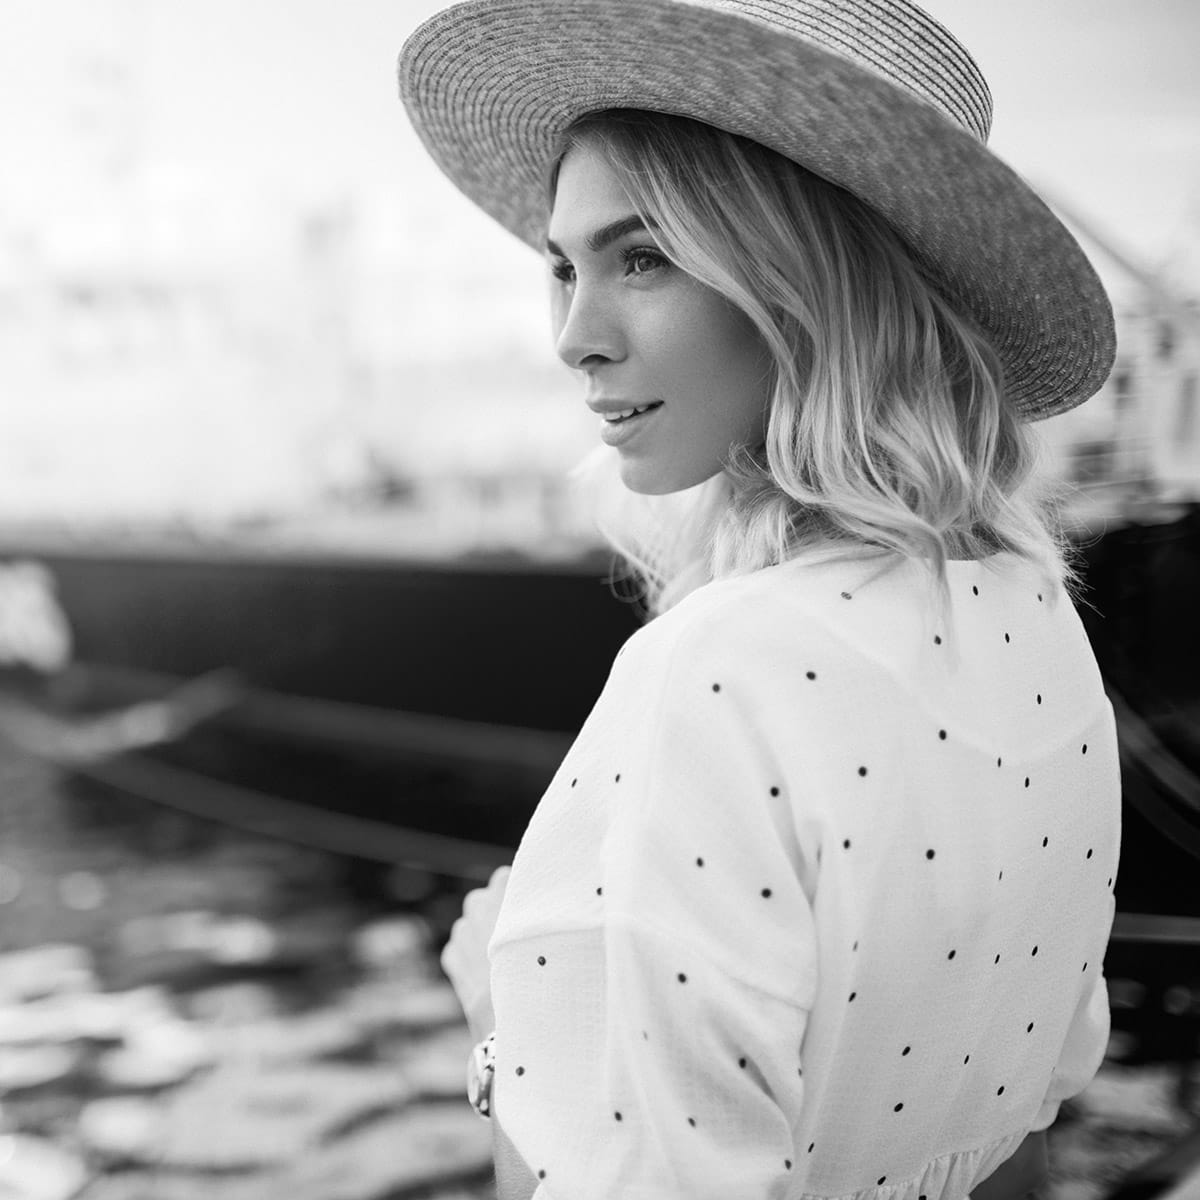 tummy tuck patient model in a sun hat and polka dot dress looking over a body of water